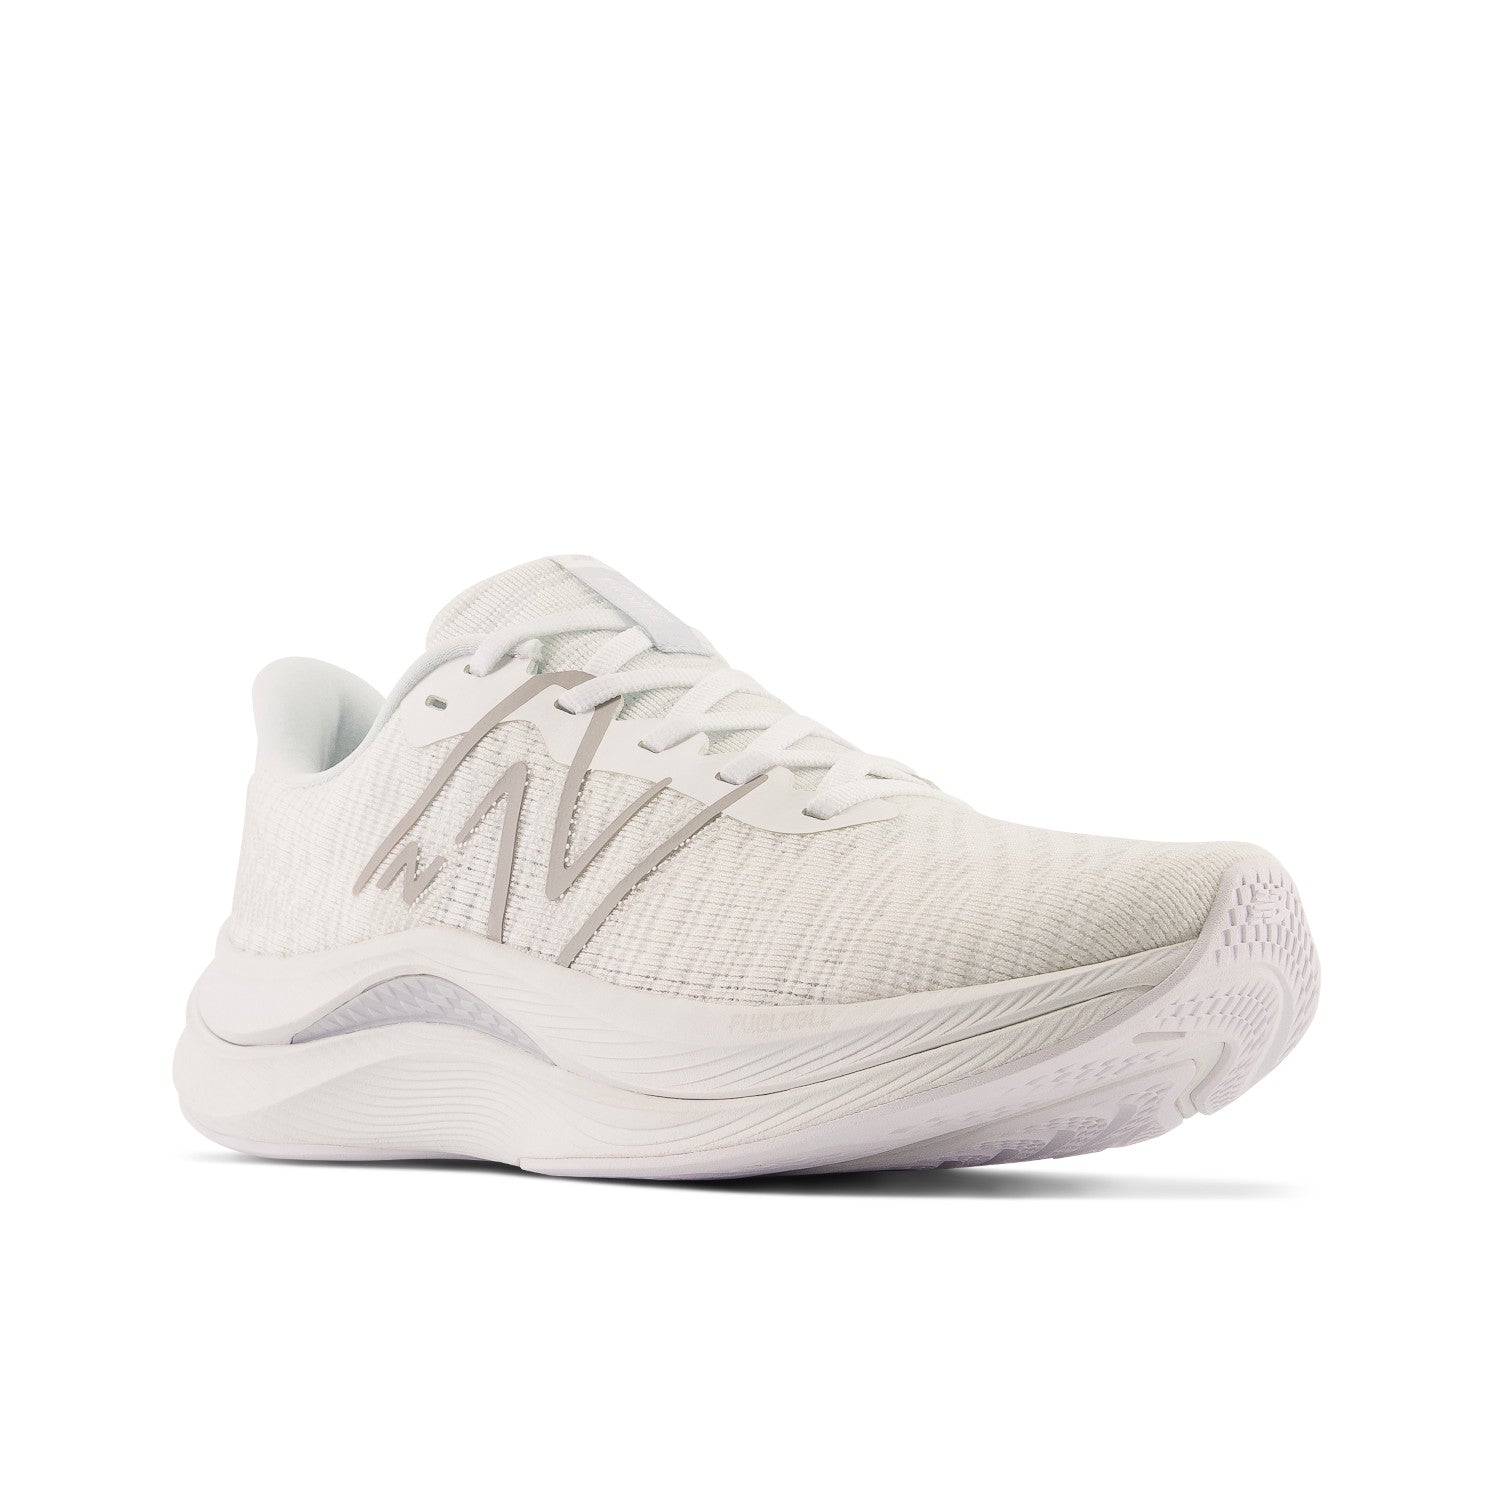 New Balance FuelCell Propel WFCPRLW4 Women's 1